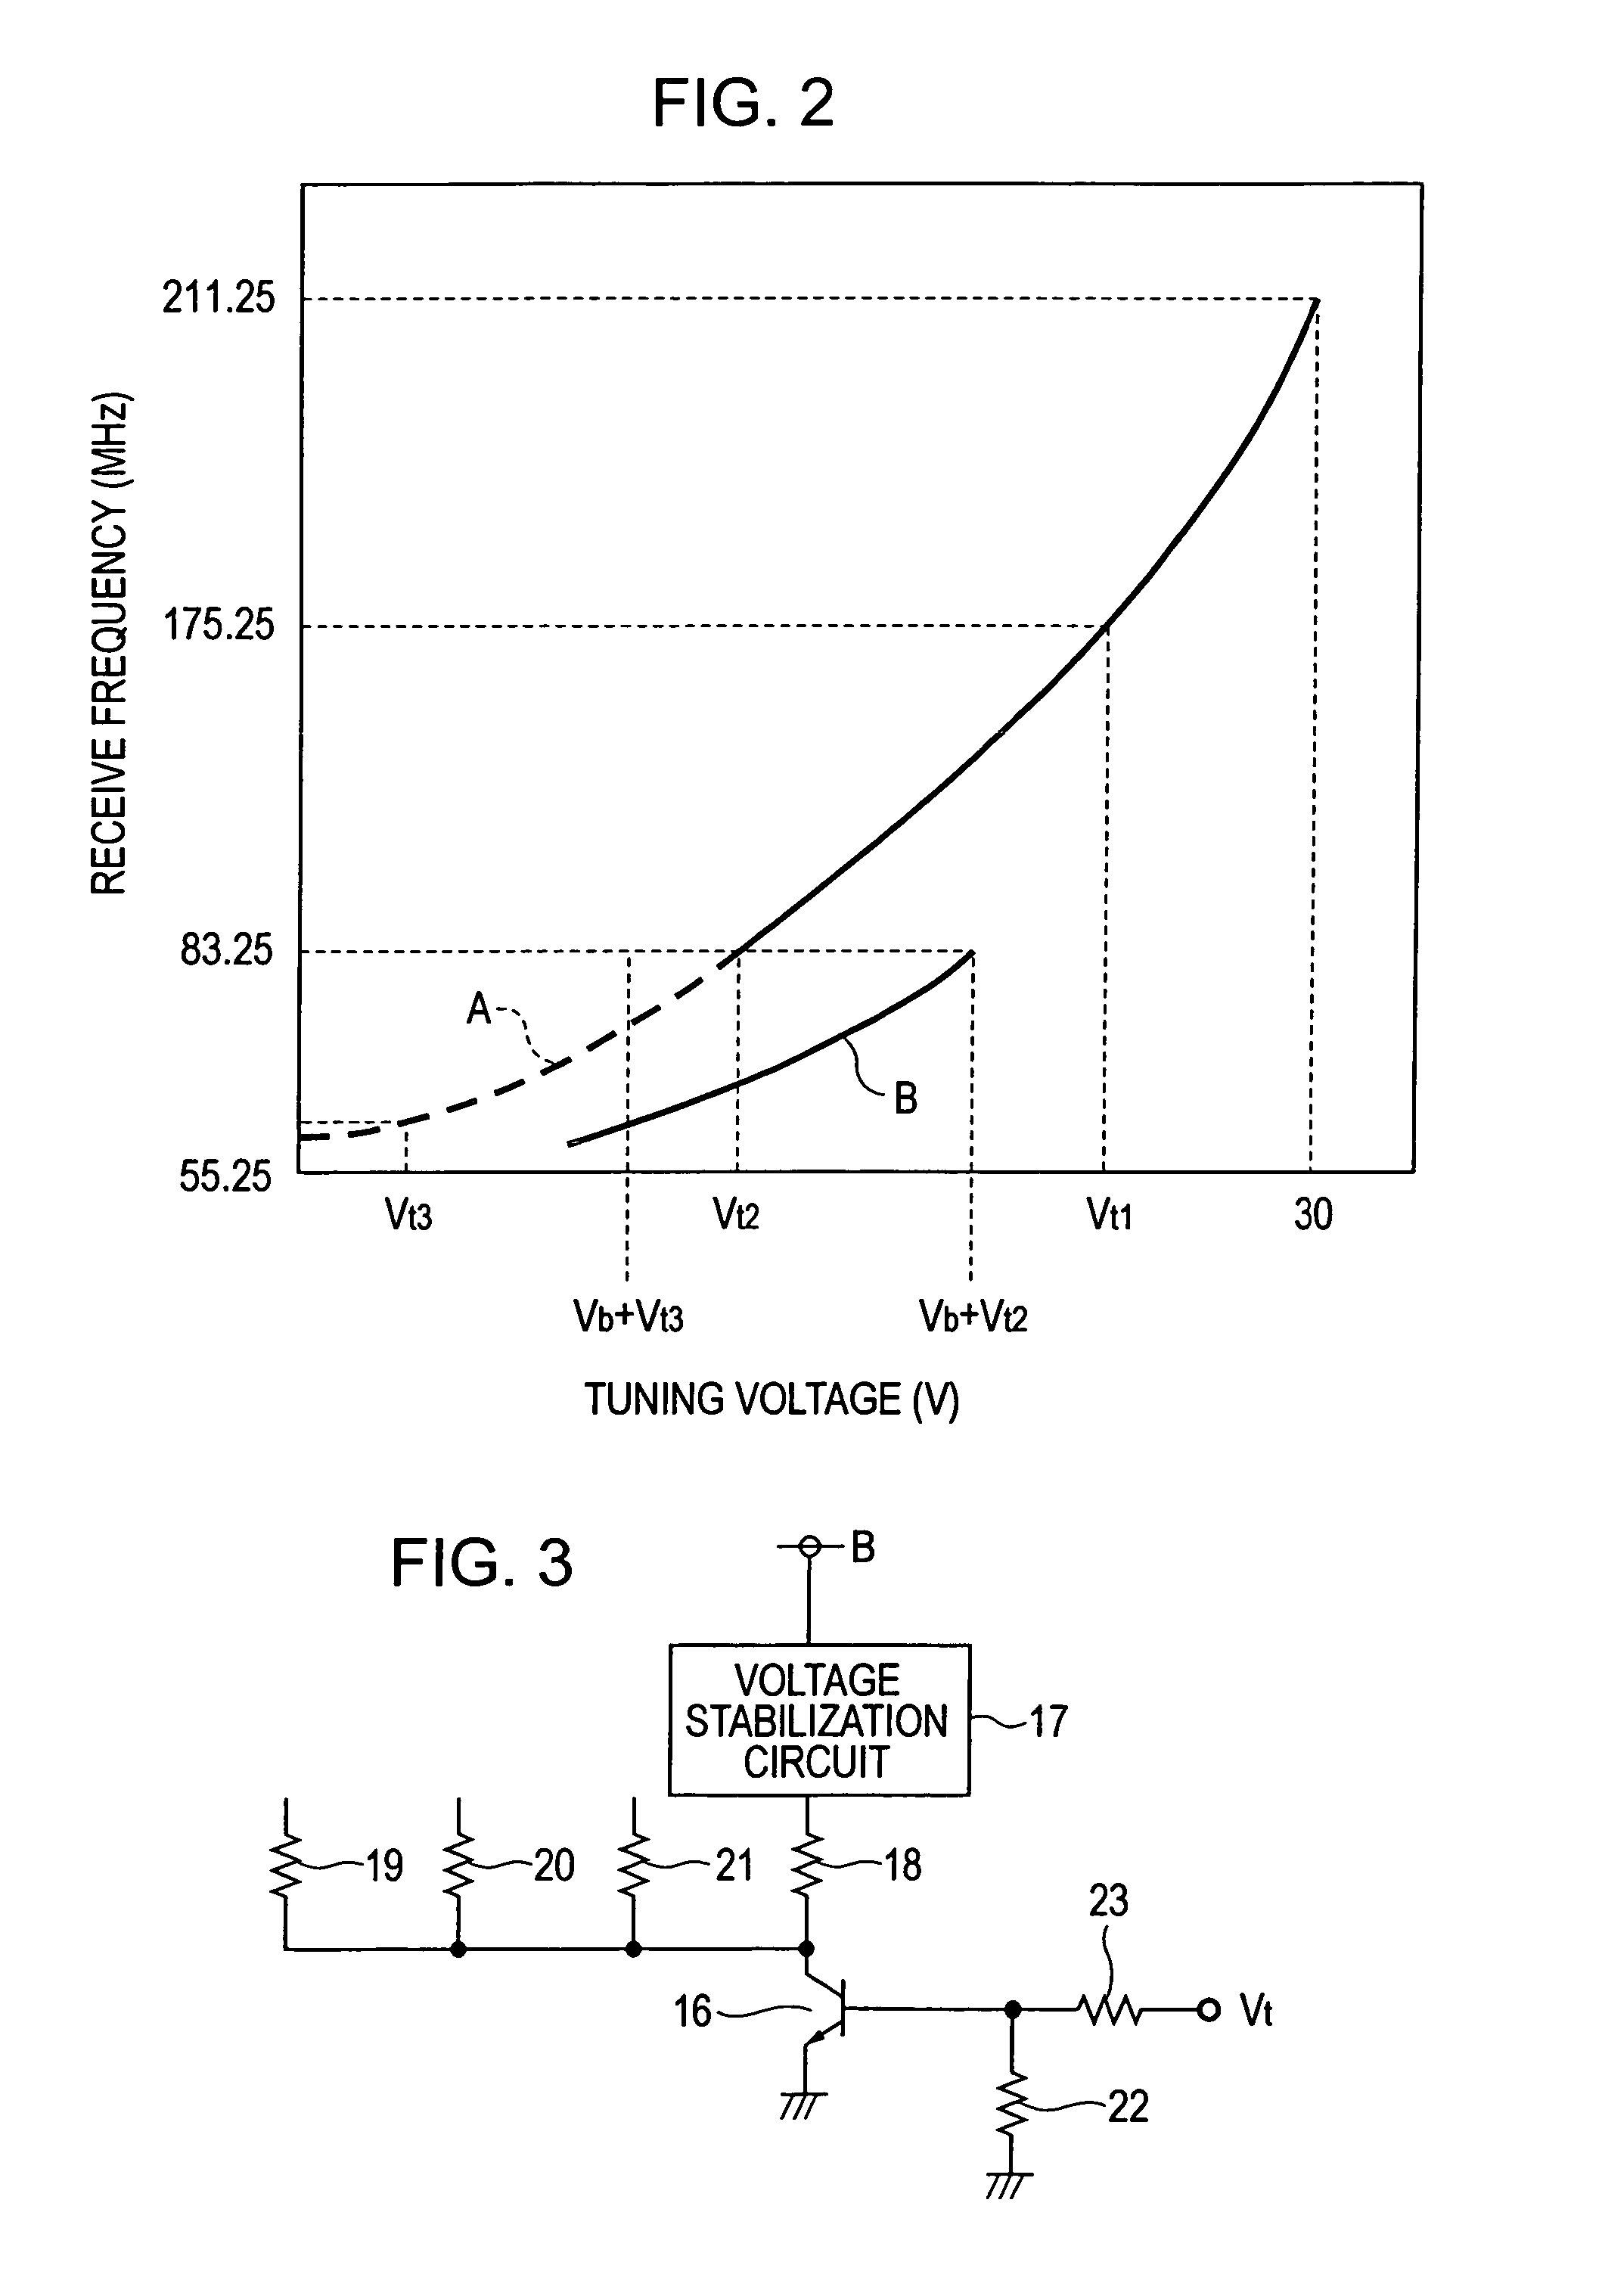 Wide-frequency-range television tuner